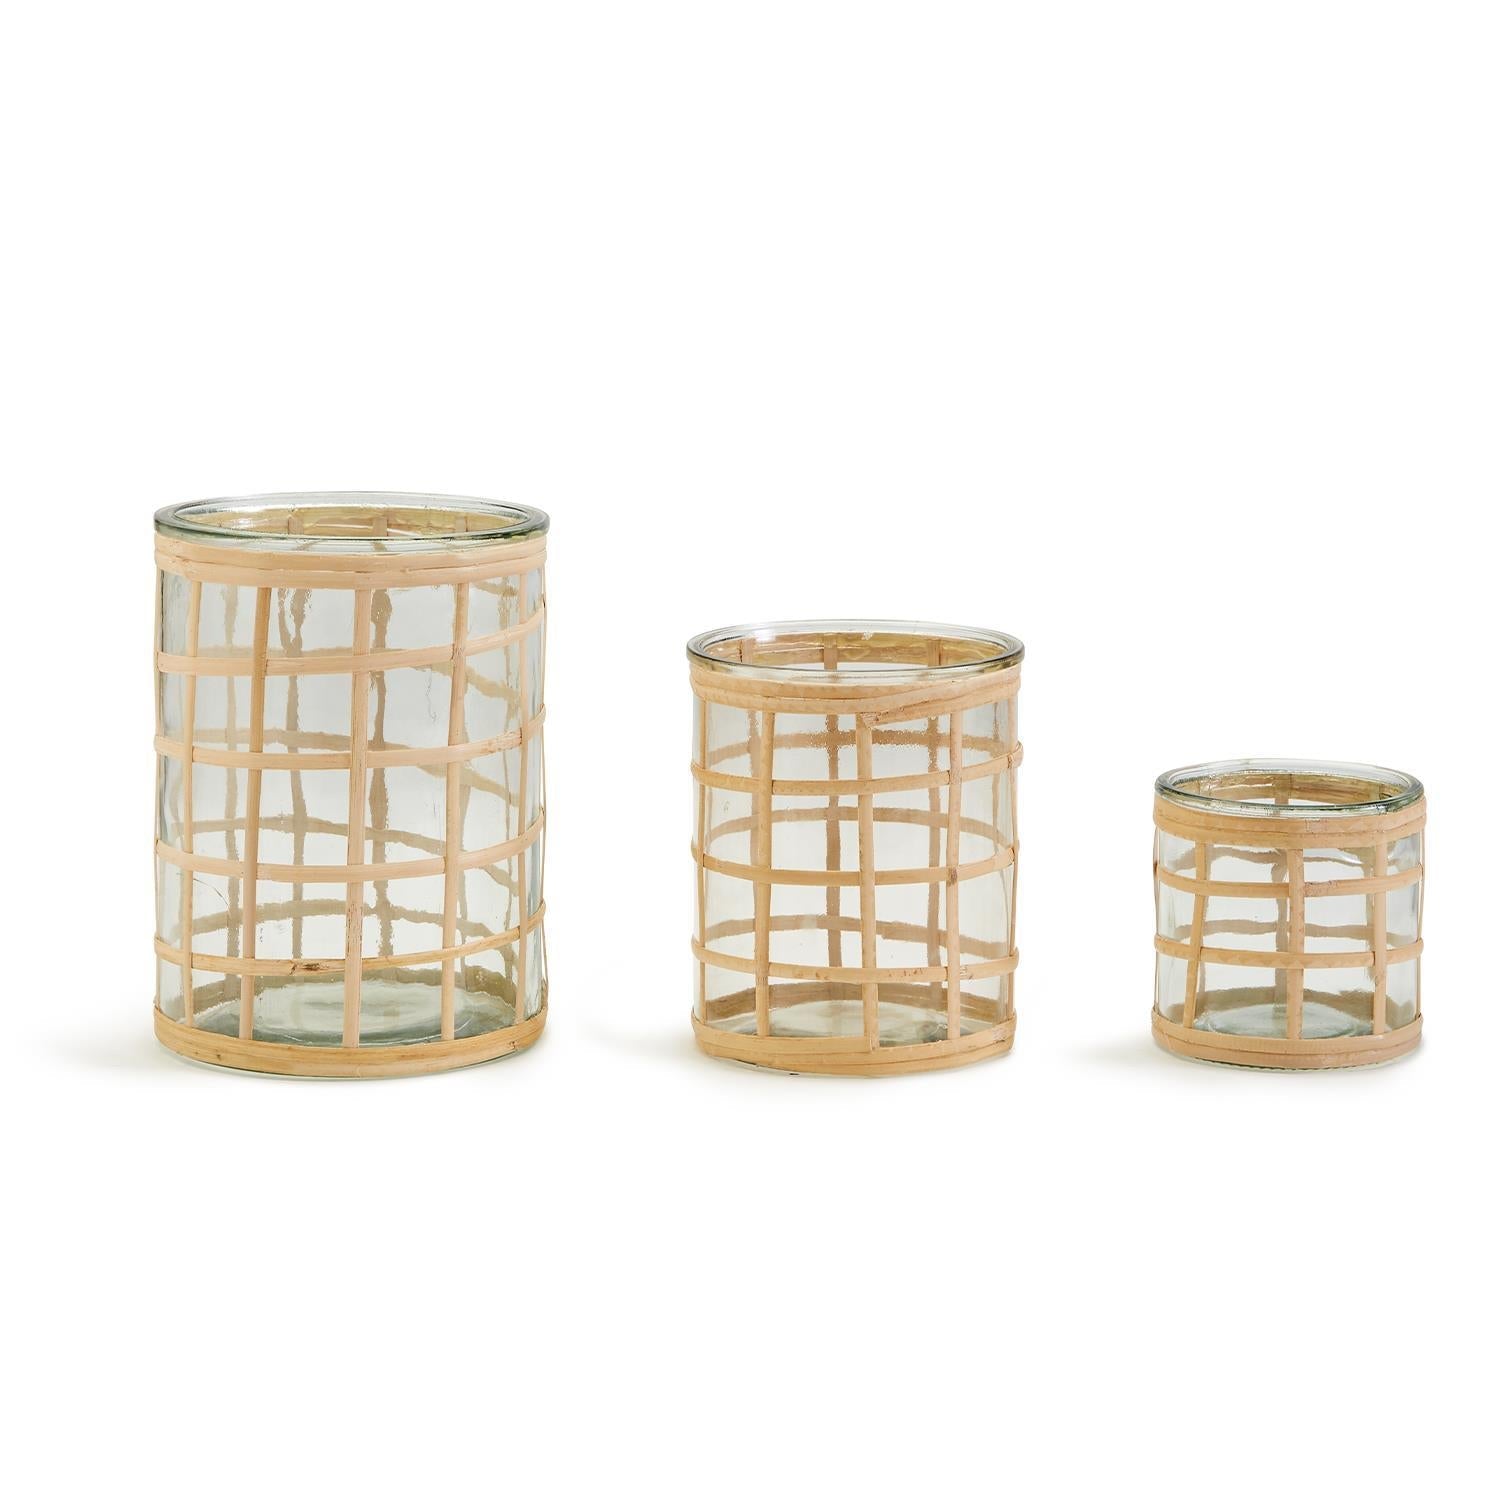 Rattan Wrapped Cachepot